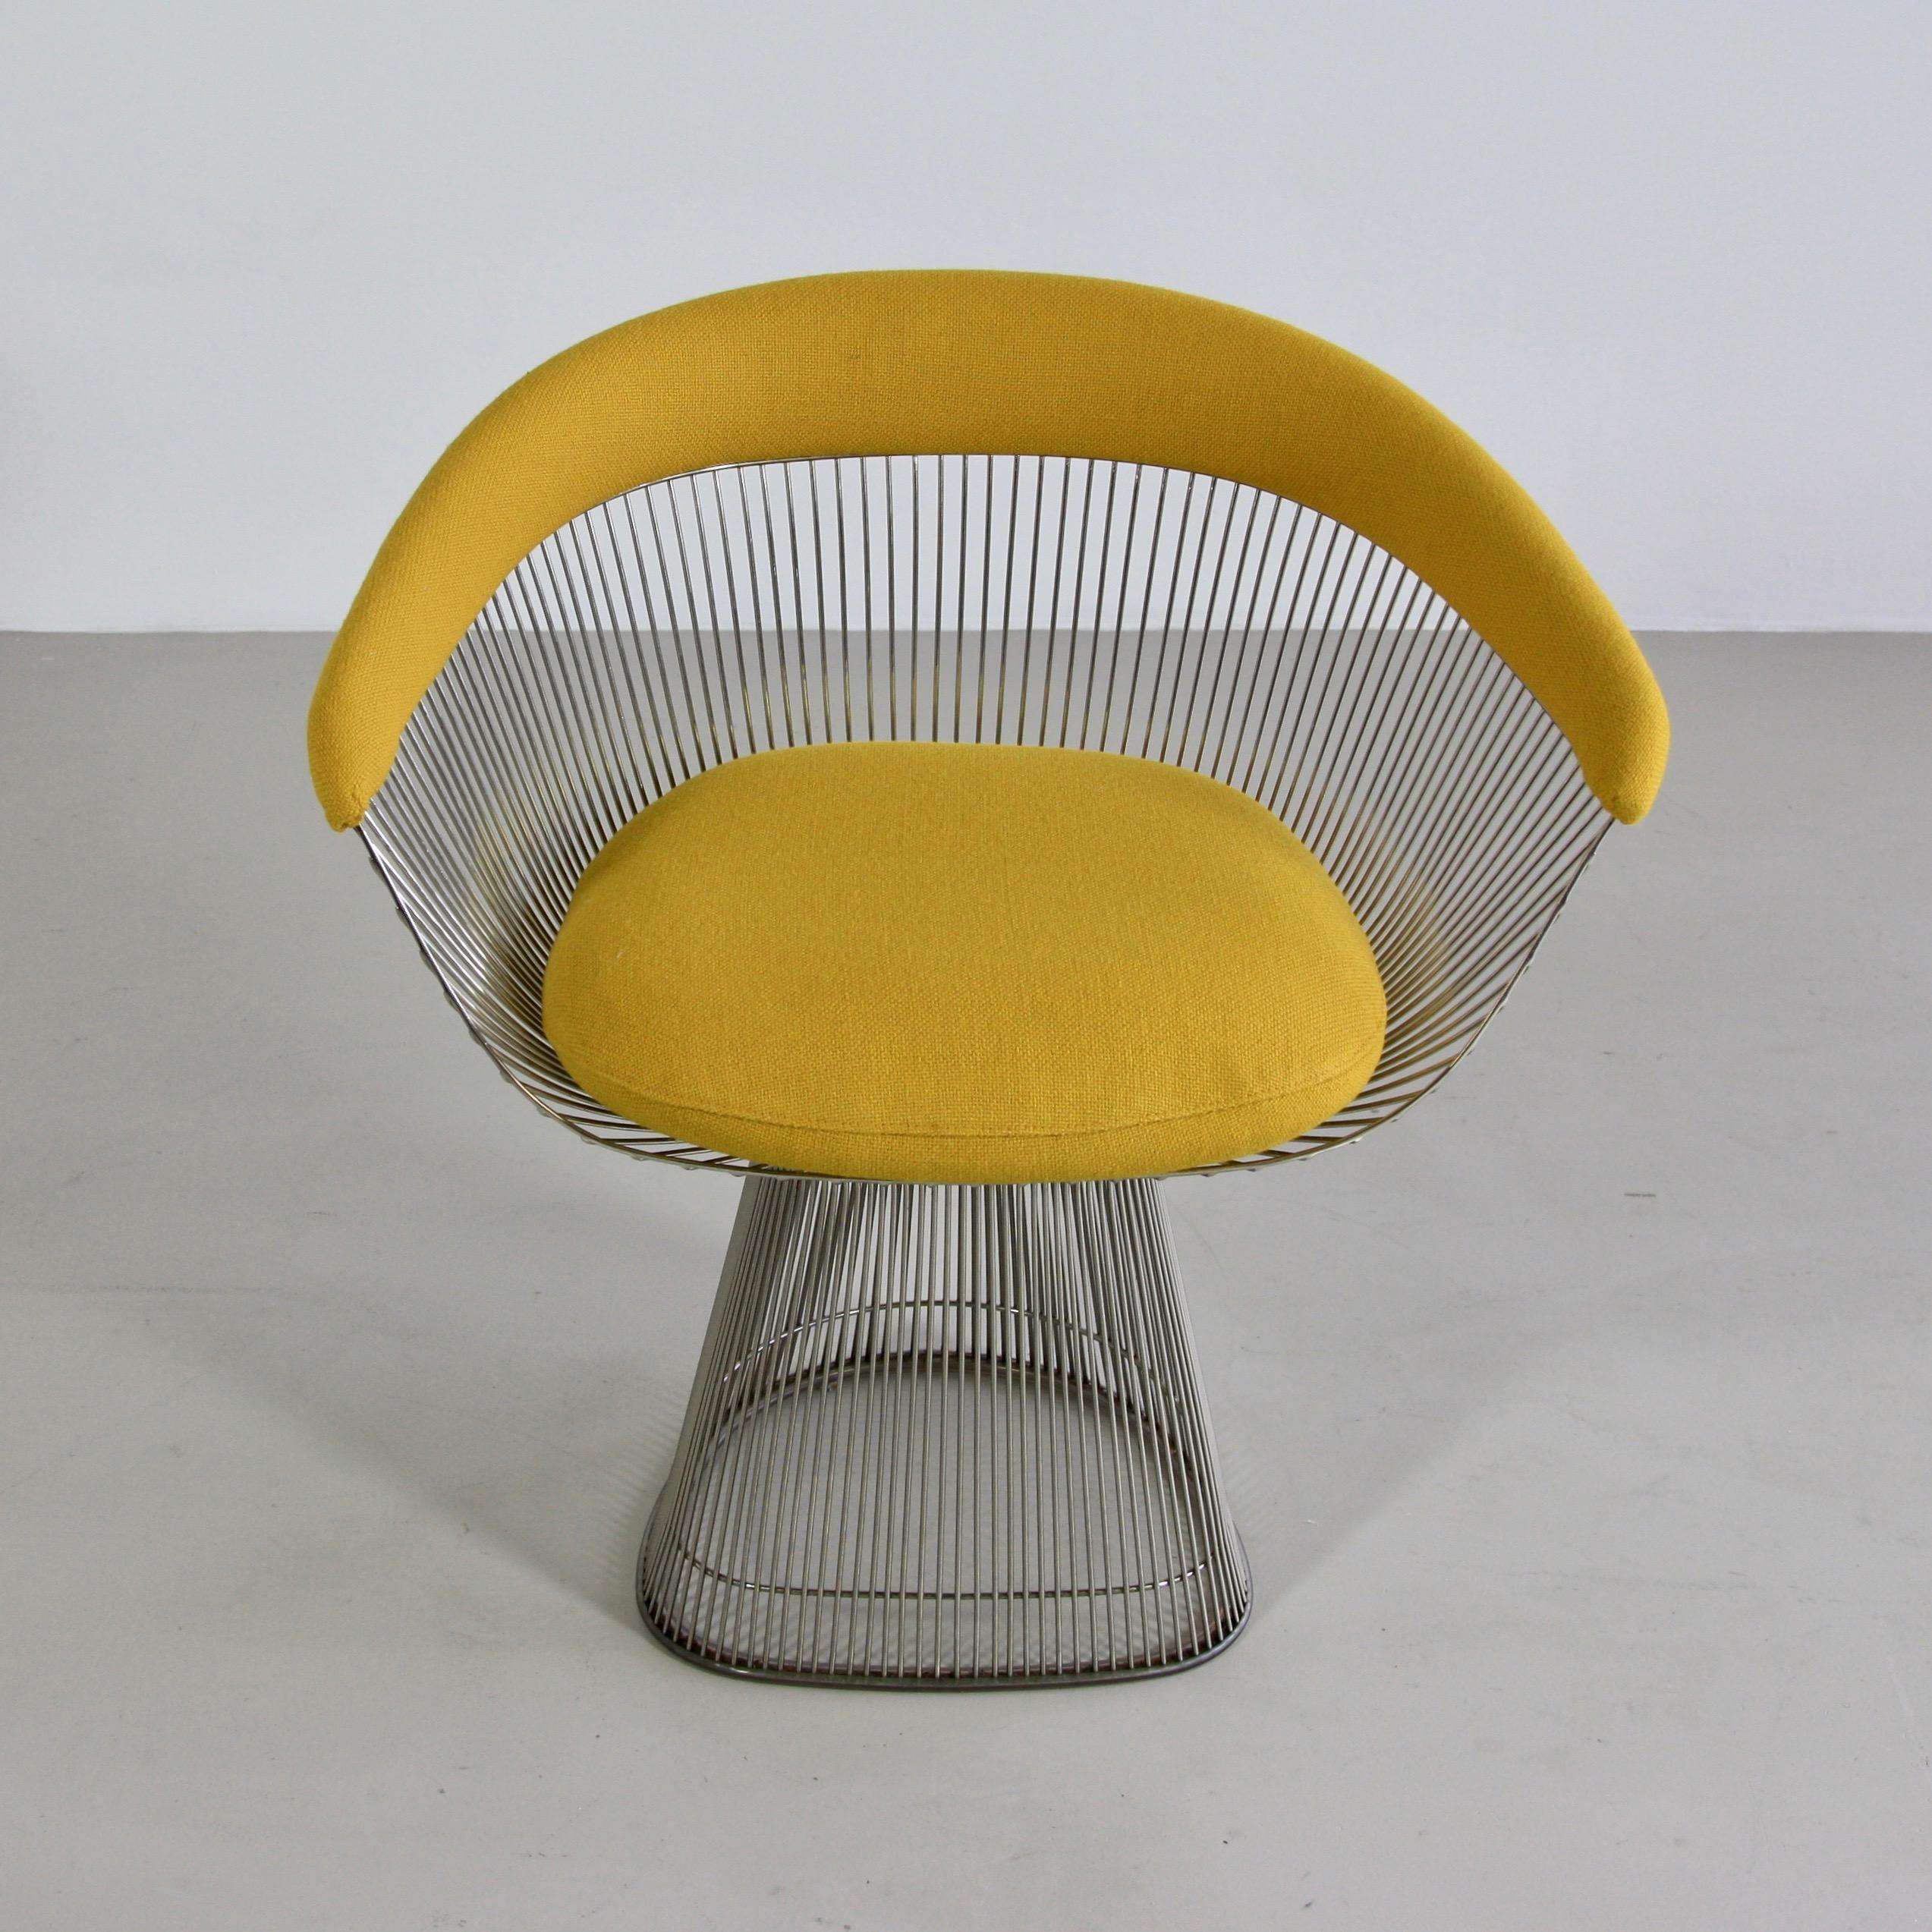 Set of 2 armchairs designed by Warren Platner. U.S.A., Knoll International, 1966.

Wonderful vintage set of four chairs in polished nickel, newly upholstered in yellow Kvadrat material. A set dating from the 1980s. Perfect!

Literature: Fiell,